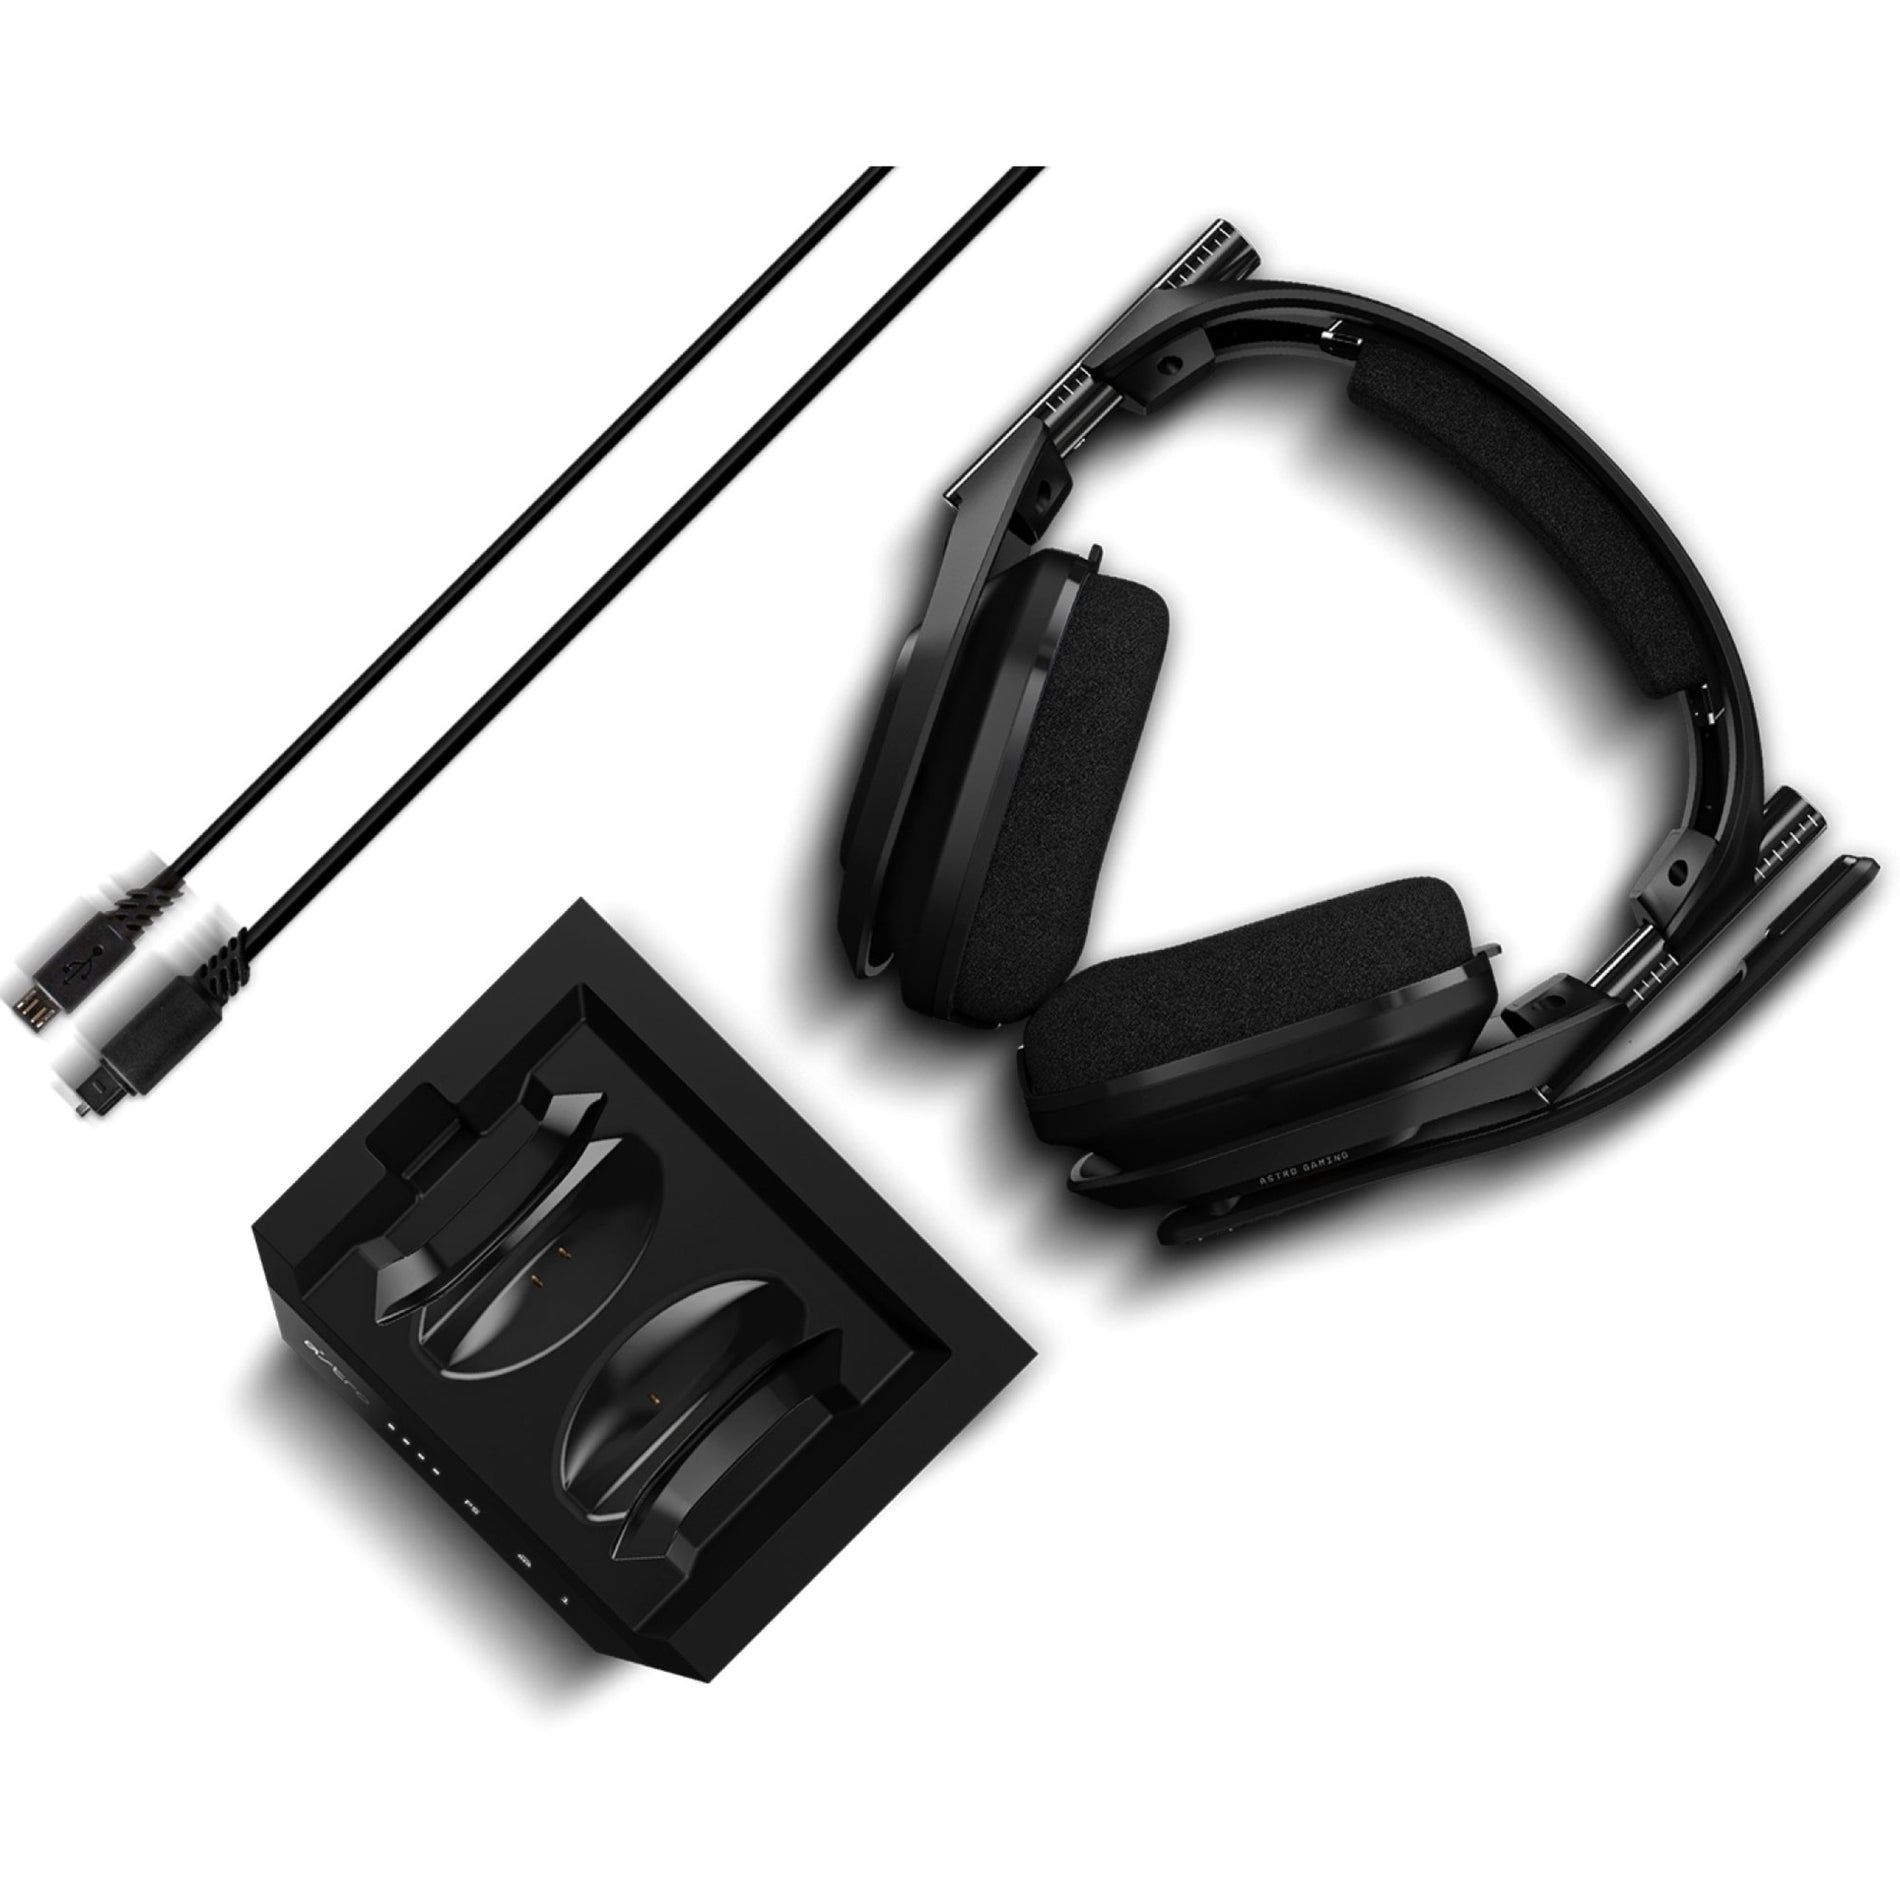 Astro 939-001673 A50 Wireless Headset with Lithium-Ion Battery, Durable, High-Resolution Audio, Flip to Mute, Comfortable